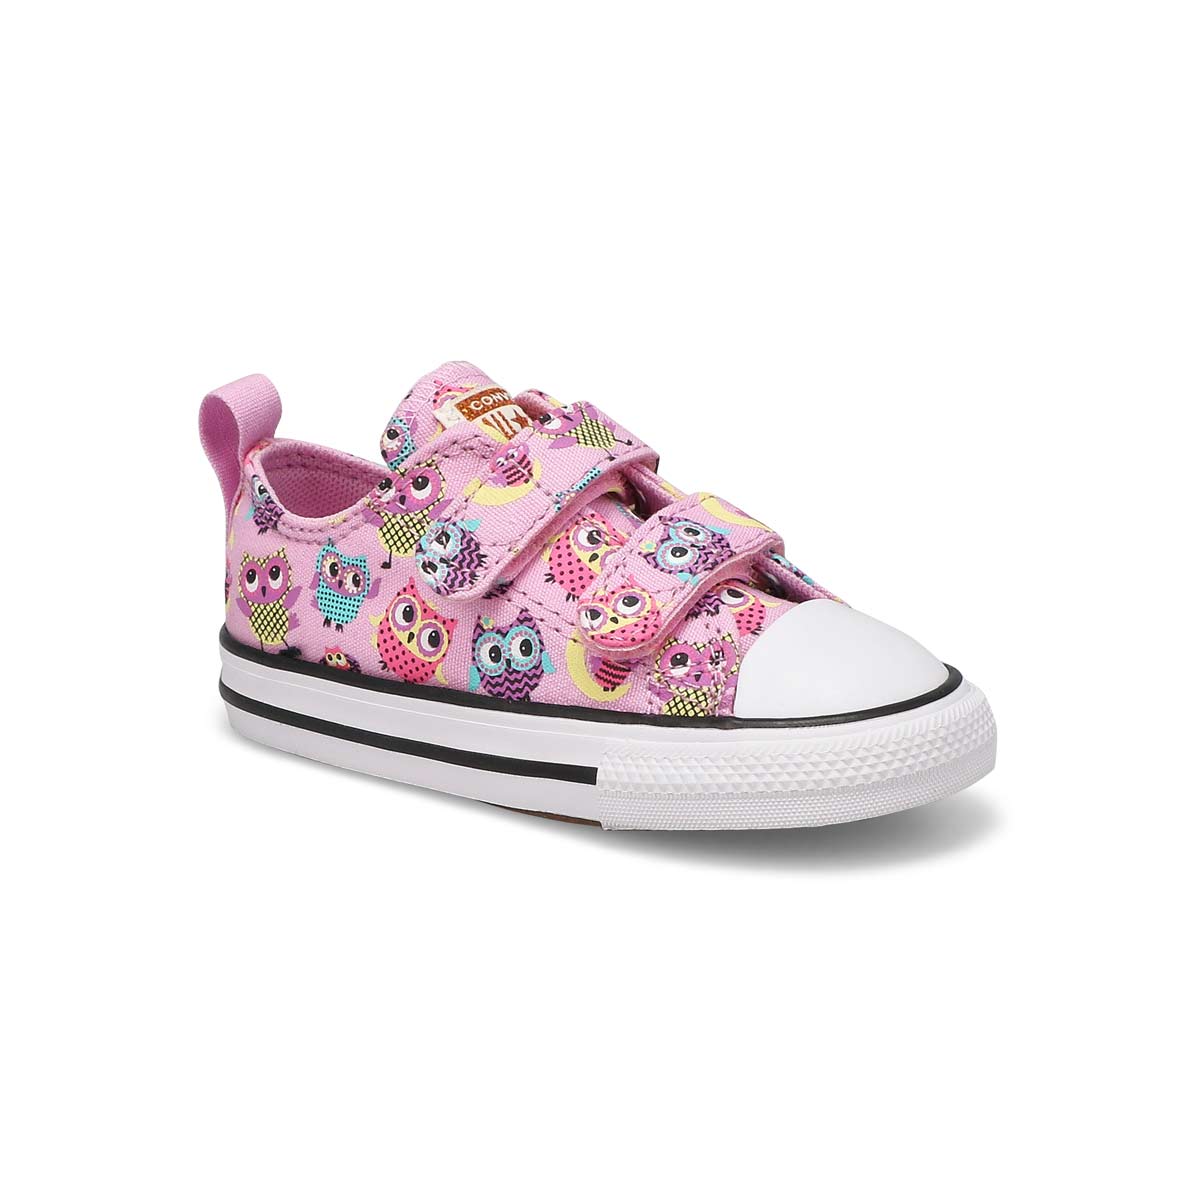 Converse Infants' CT ALL Star Forest Glam Sne | SoftMoc.com